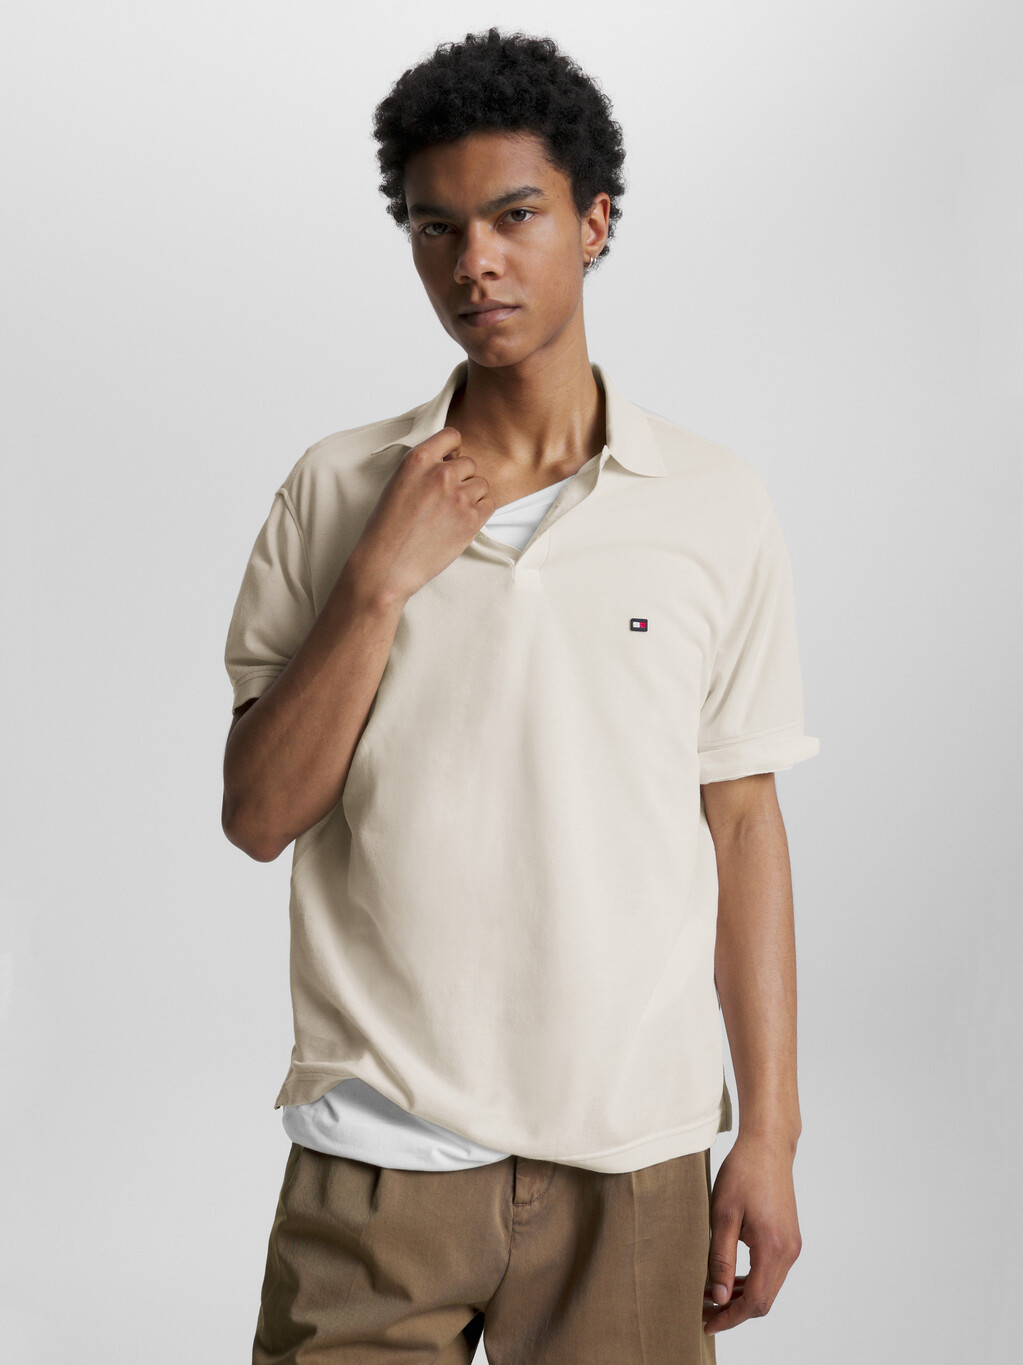 Tommy Hilfiger X Shawn Mendes Polo 衫, Weathered White, hi-res